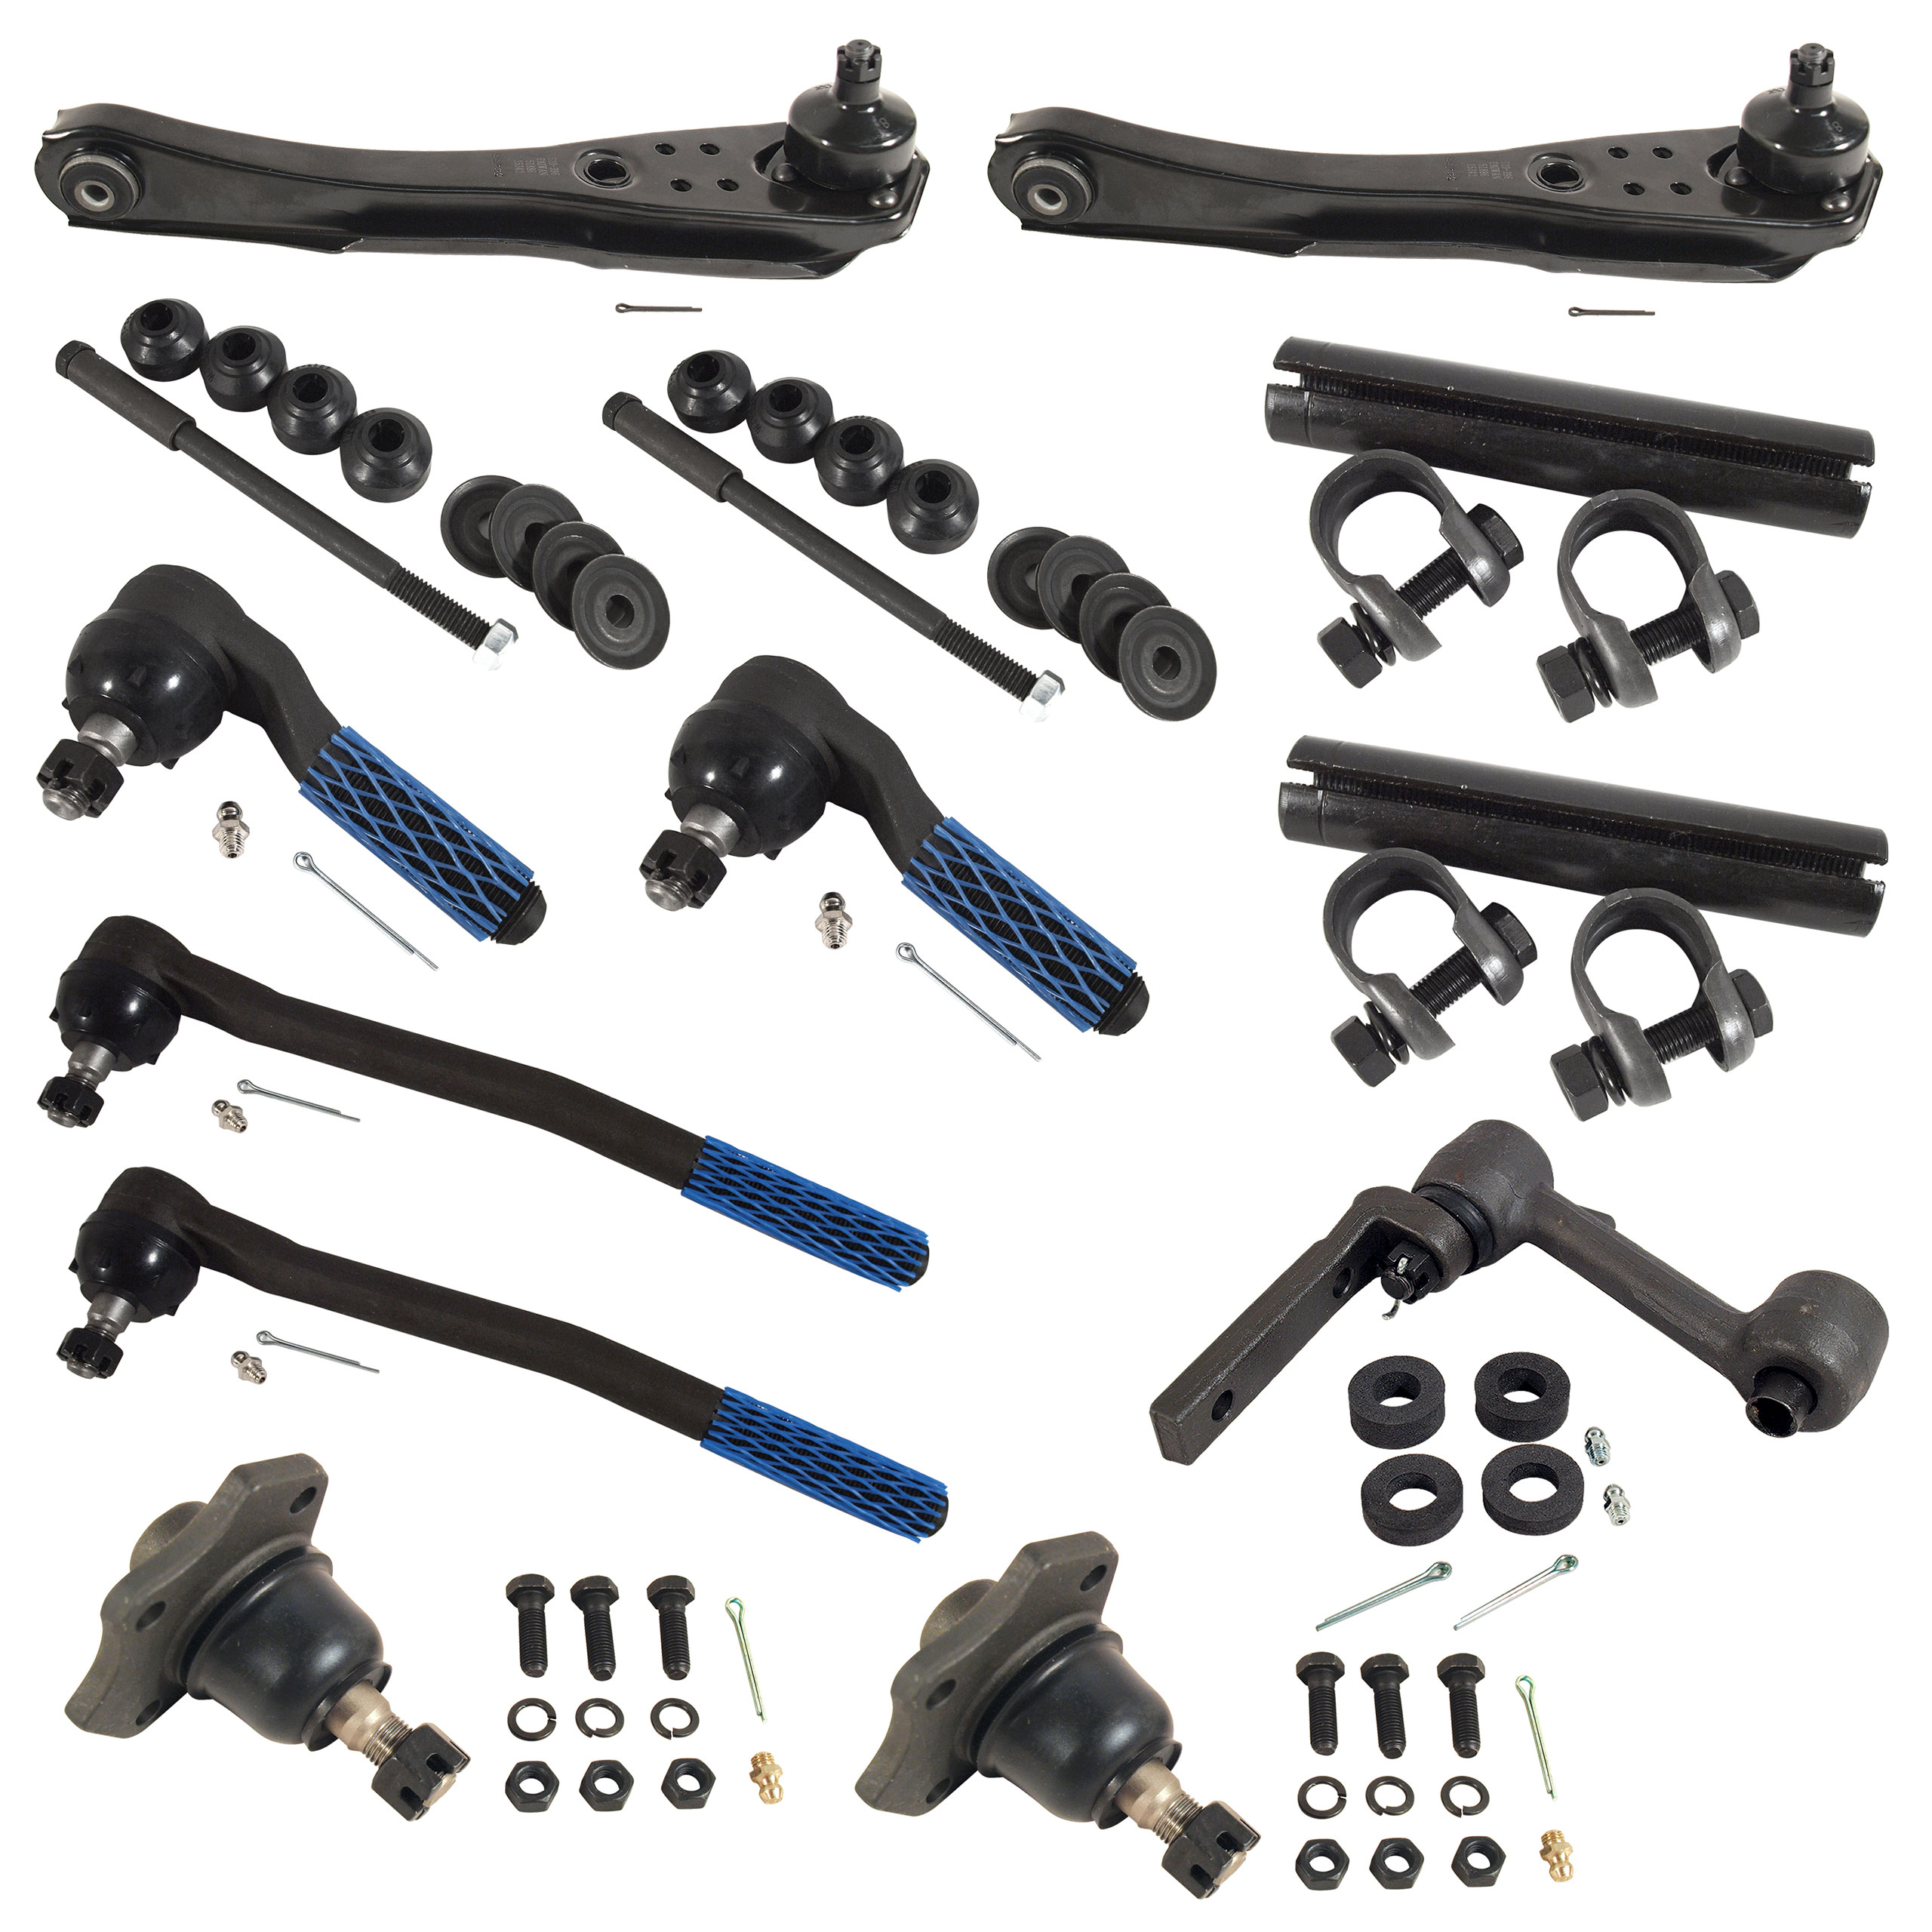  67 Mustang C2 Front Suspension Rebuild Kit Deluxe 3 Bolt Upper Ball Joint CA-MA17014